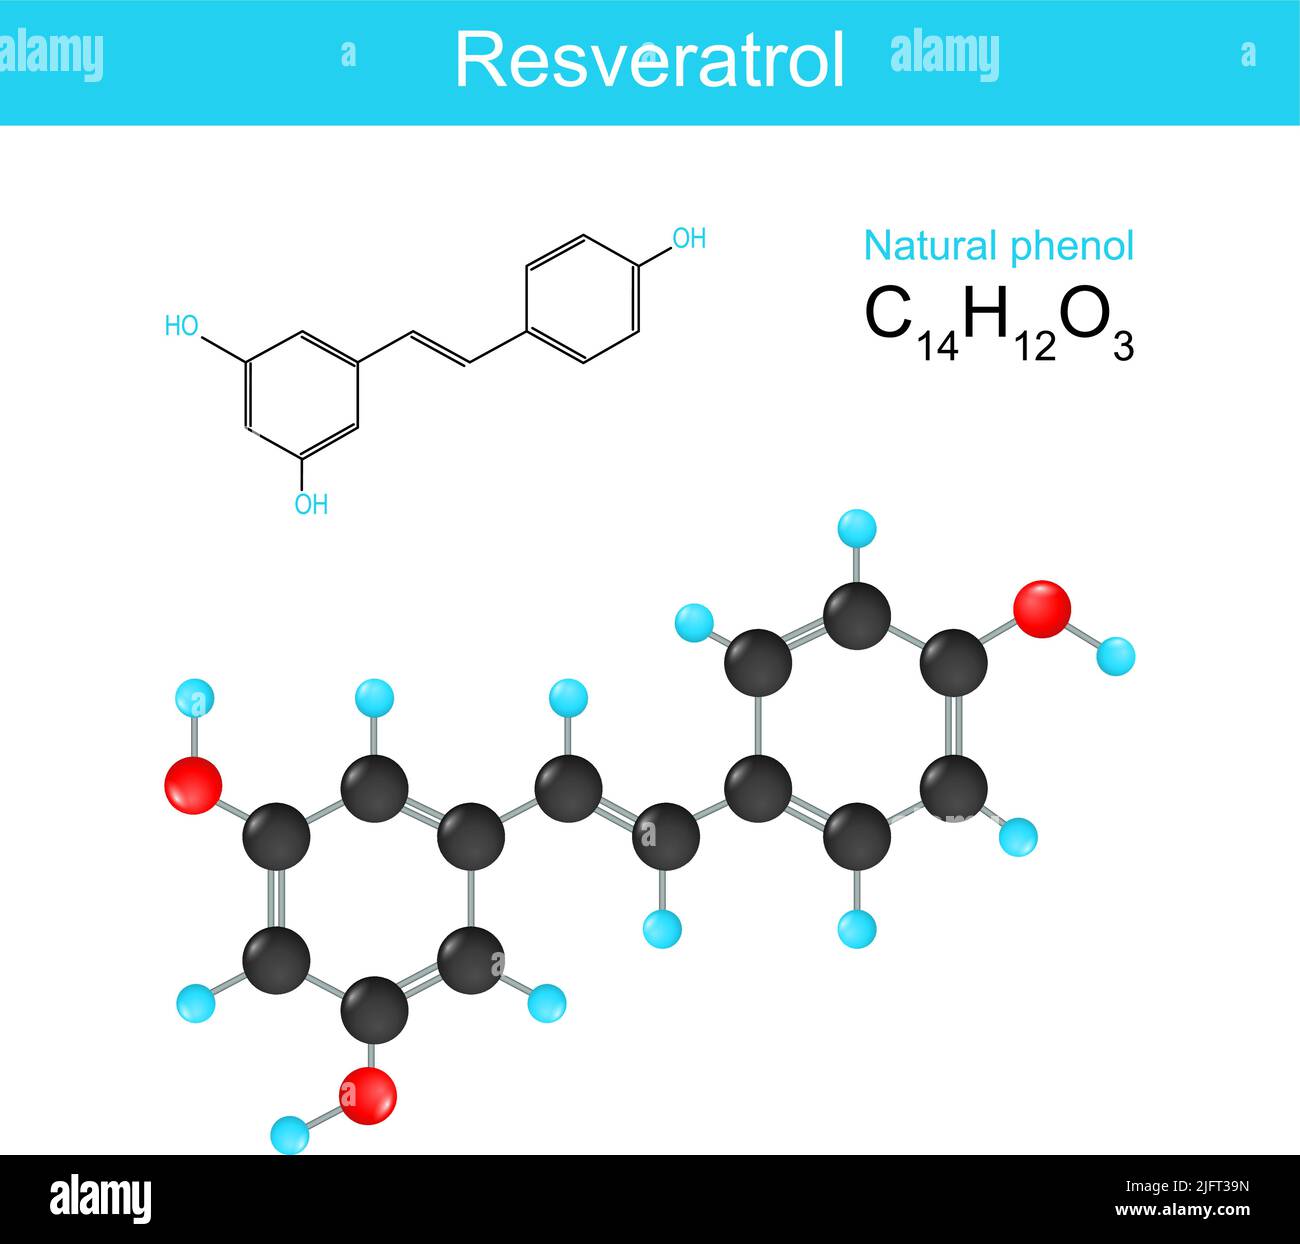 Resveratrol. Structural chemical formula of Resveratrol. Skeletal formula of a natural phenol. stilbenoid that improves lifespan. Vector illustration Stock Vector